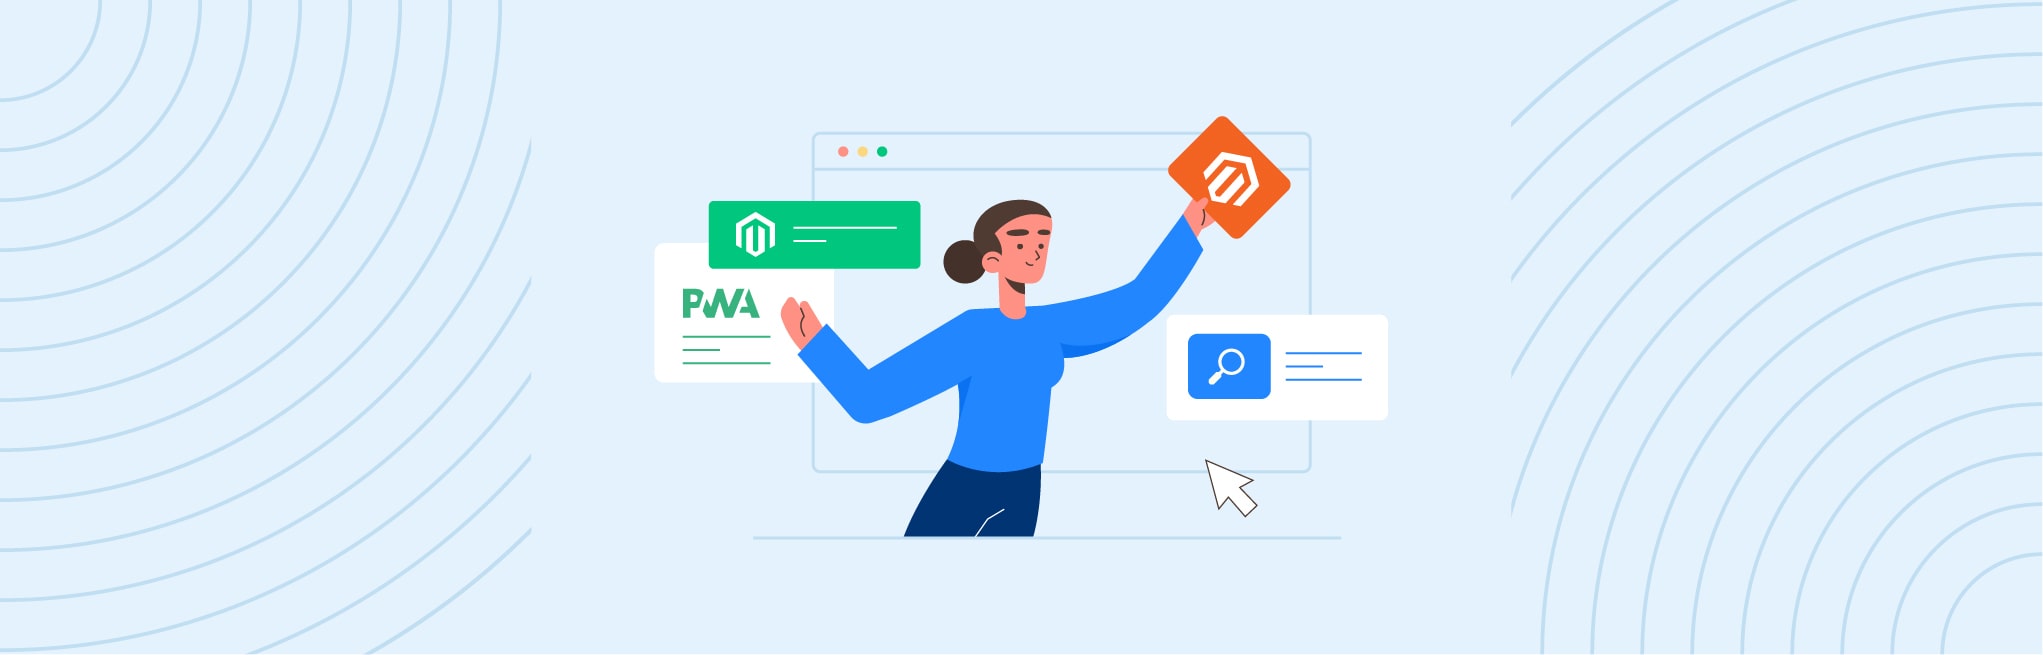 magento-pwa-everything-you-need-to-know-blog-banner